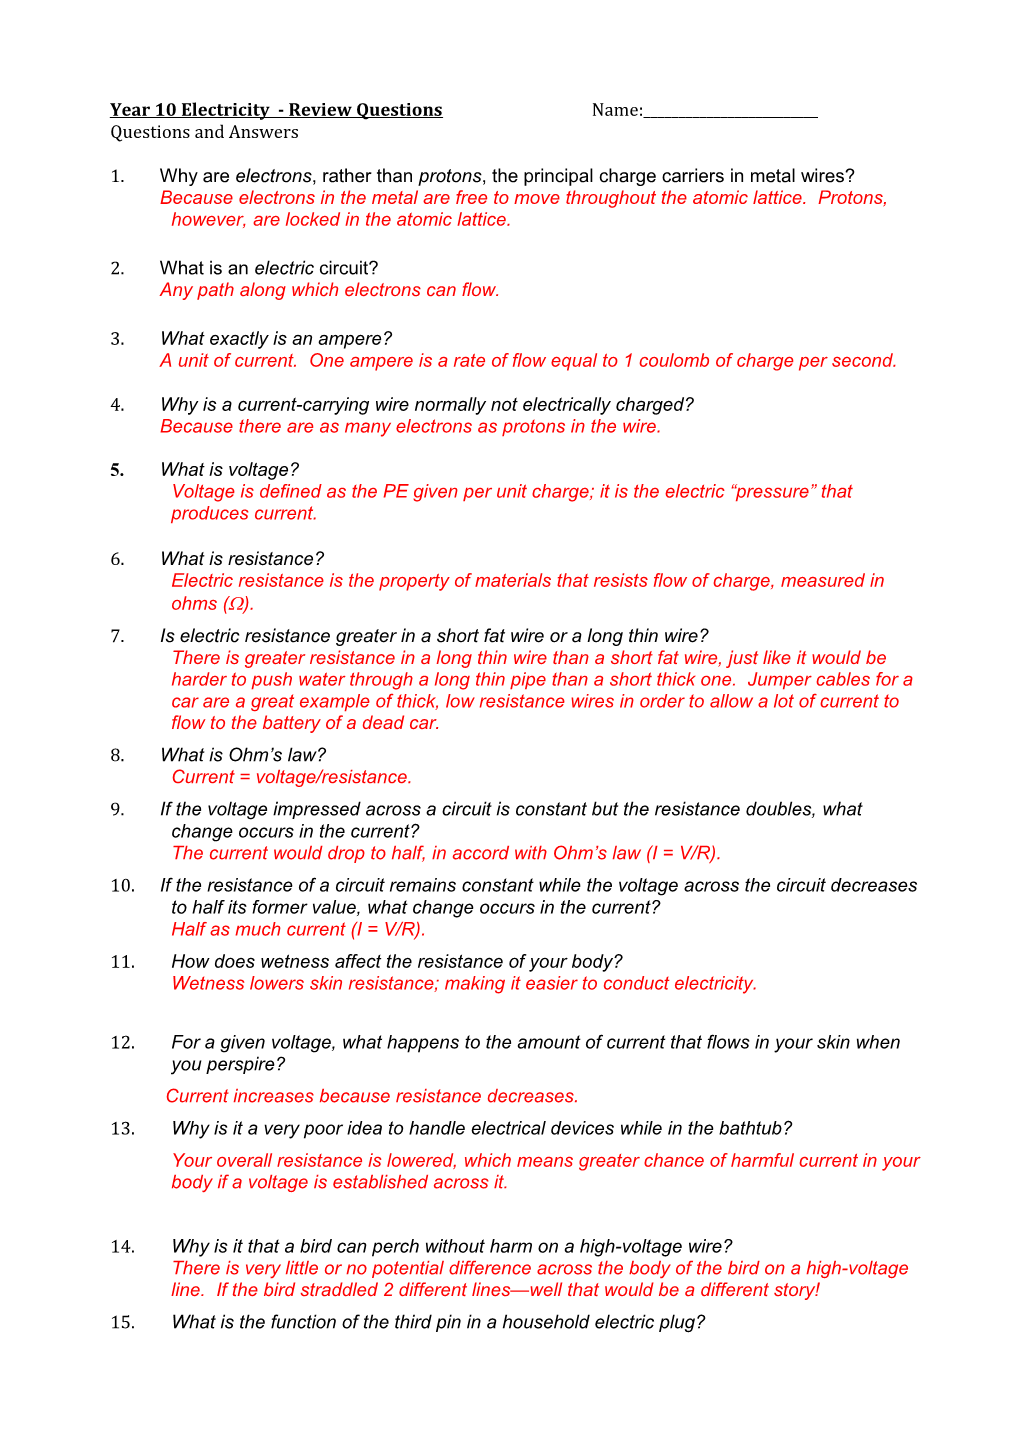 Year 10 Electricity - Review Questions Name:______